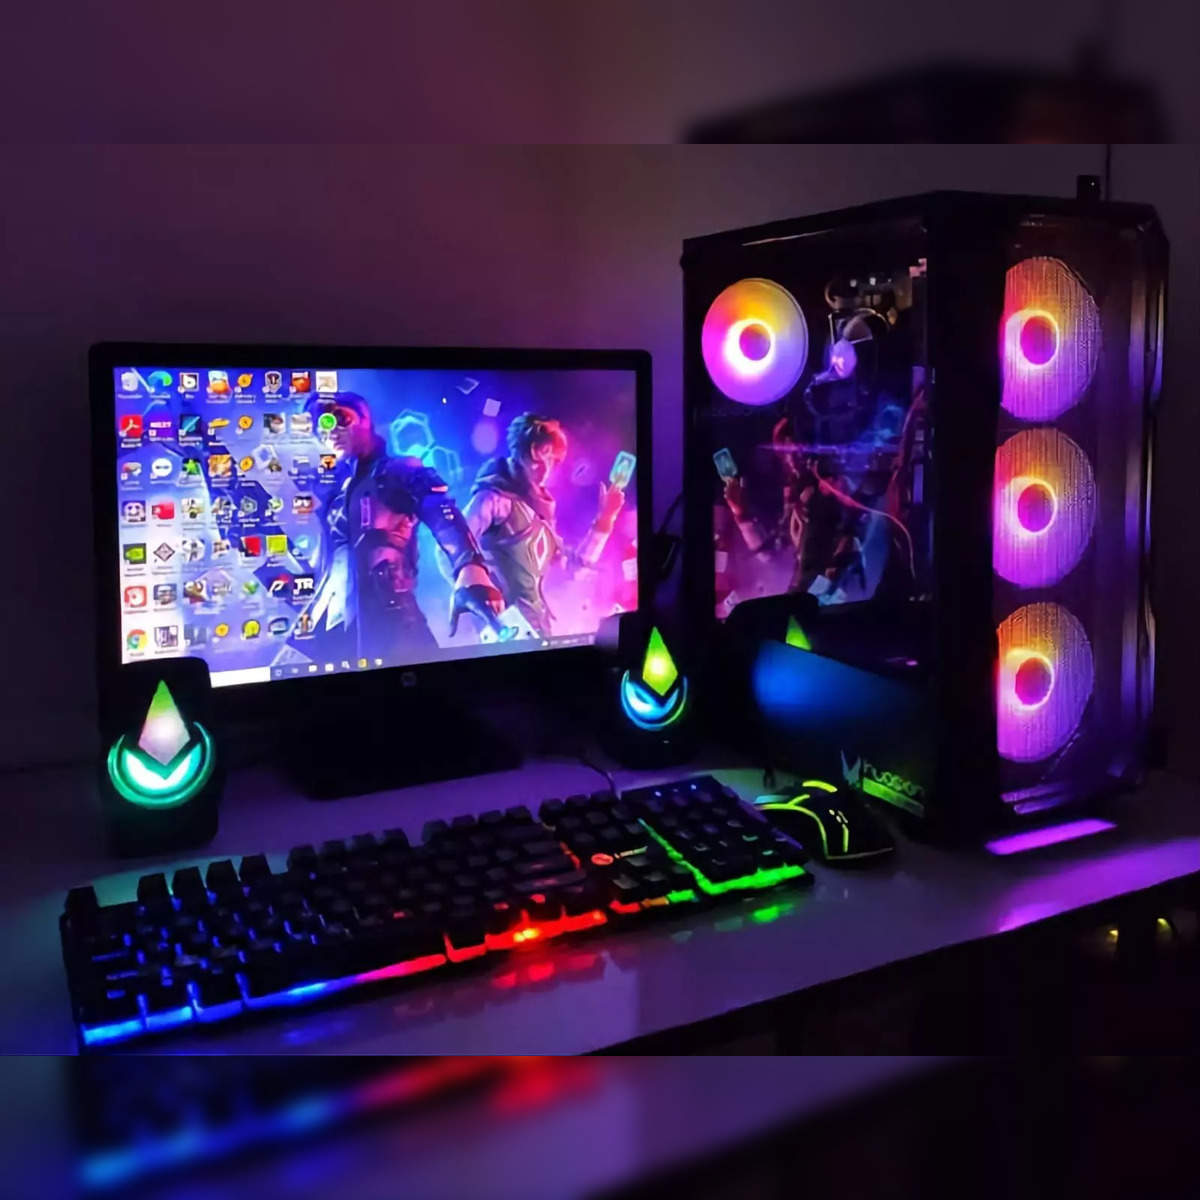 The PC Gamer team's personal gaming setups